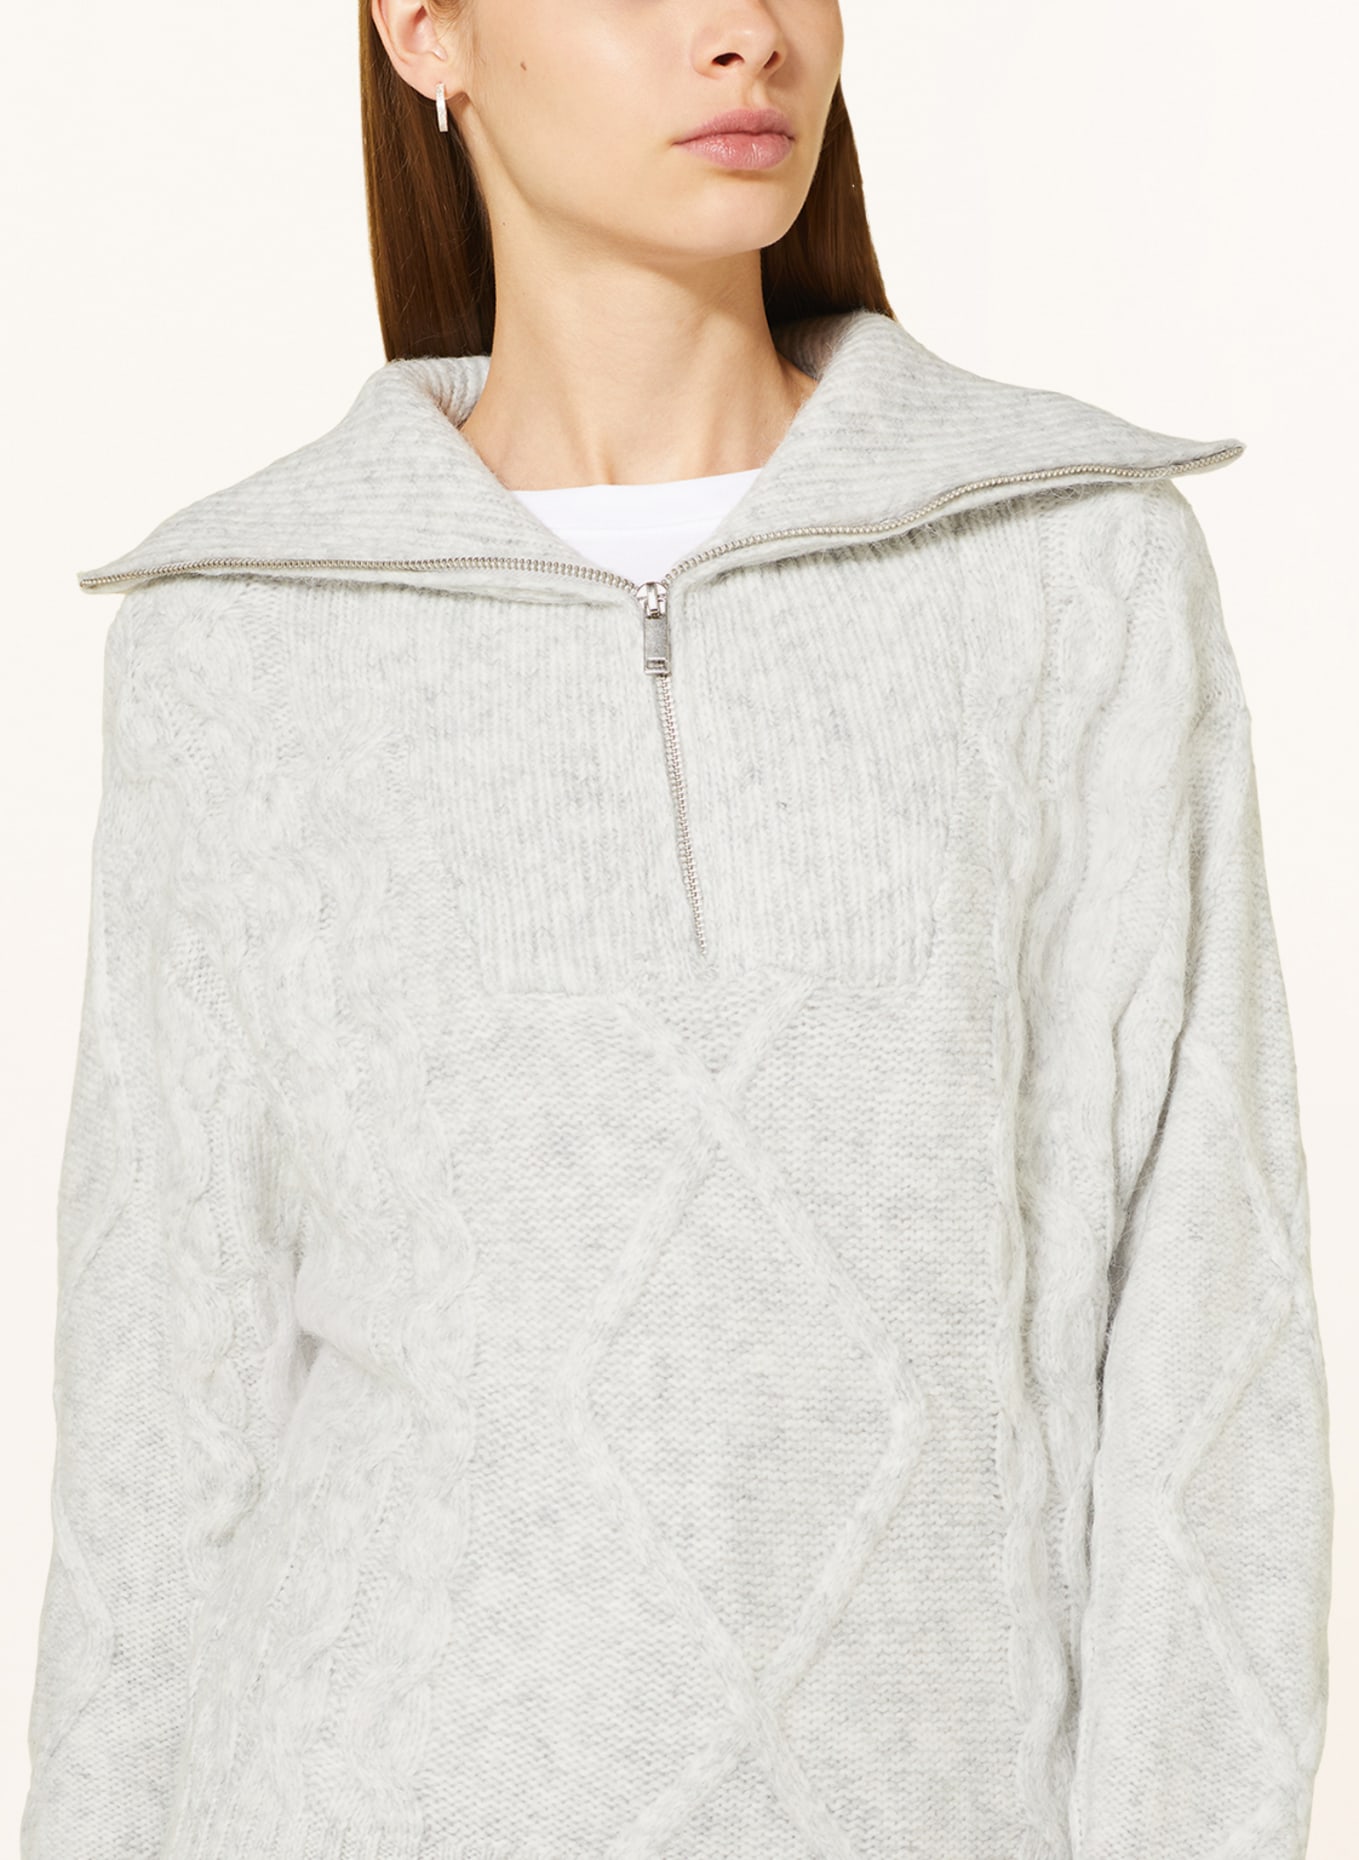 gina tricot Half-zip sweater, Color: LIGHT GRAY (Image 4)